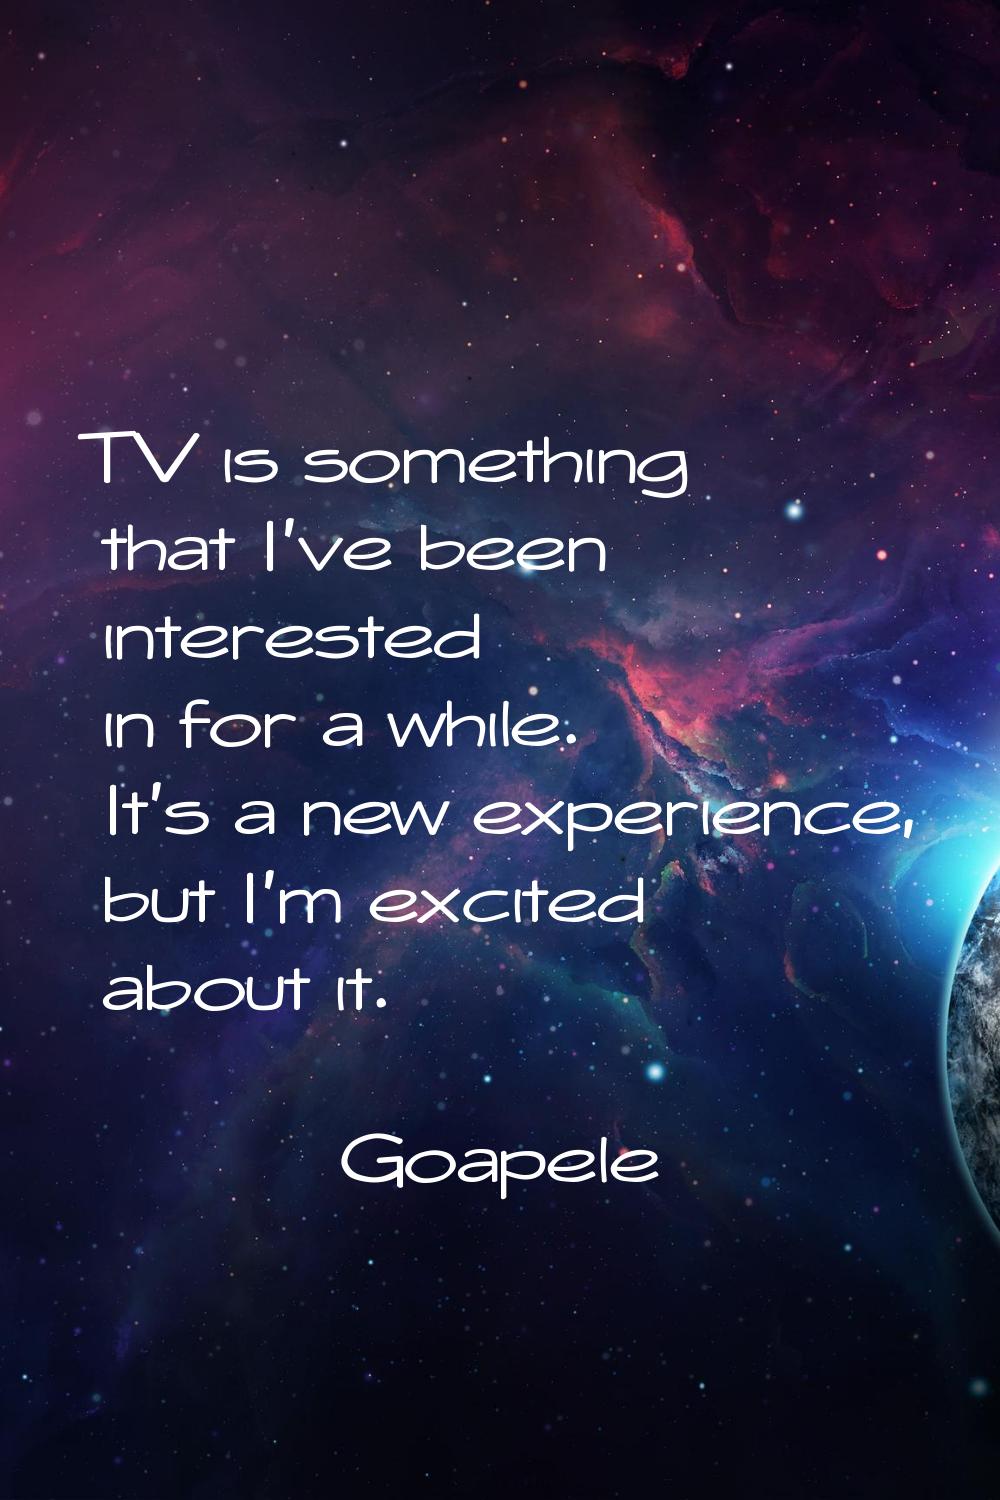 TV is something that I've been interested in for a while. It's a new experience, but I'm excited ab